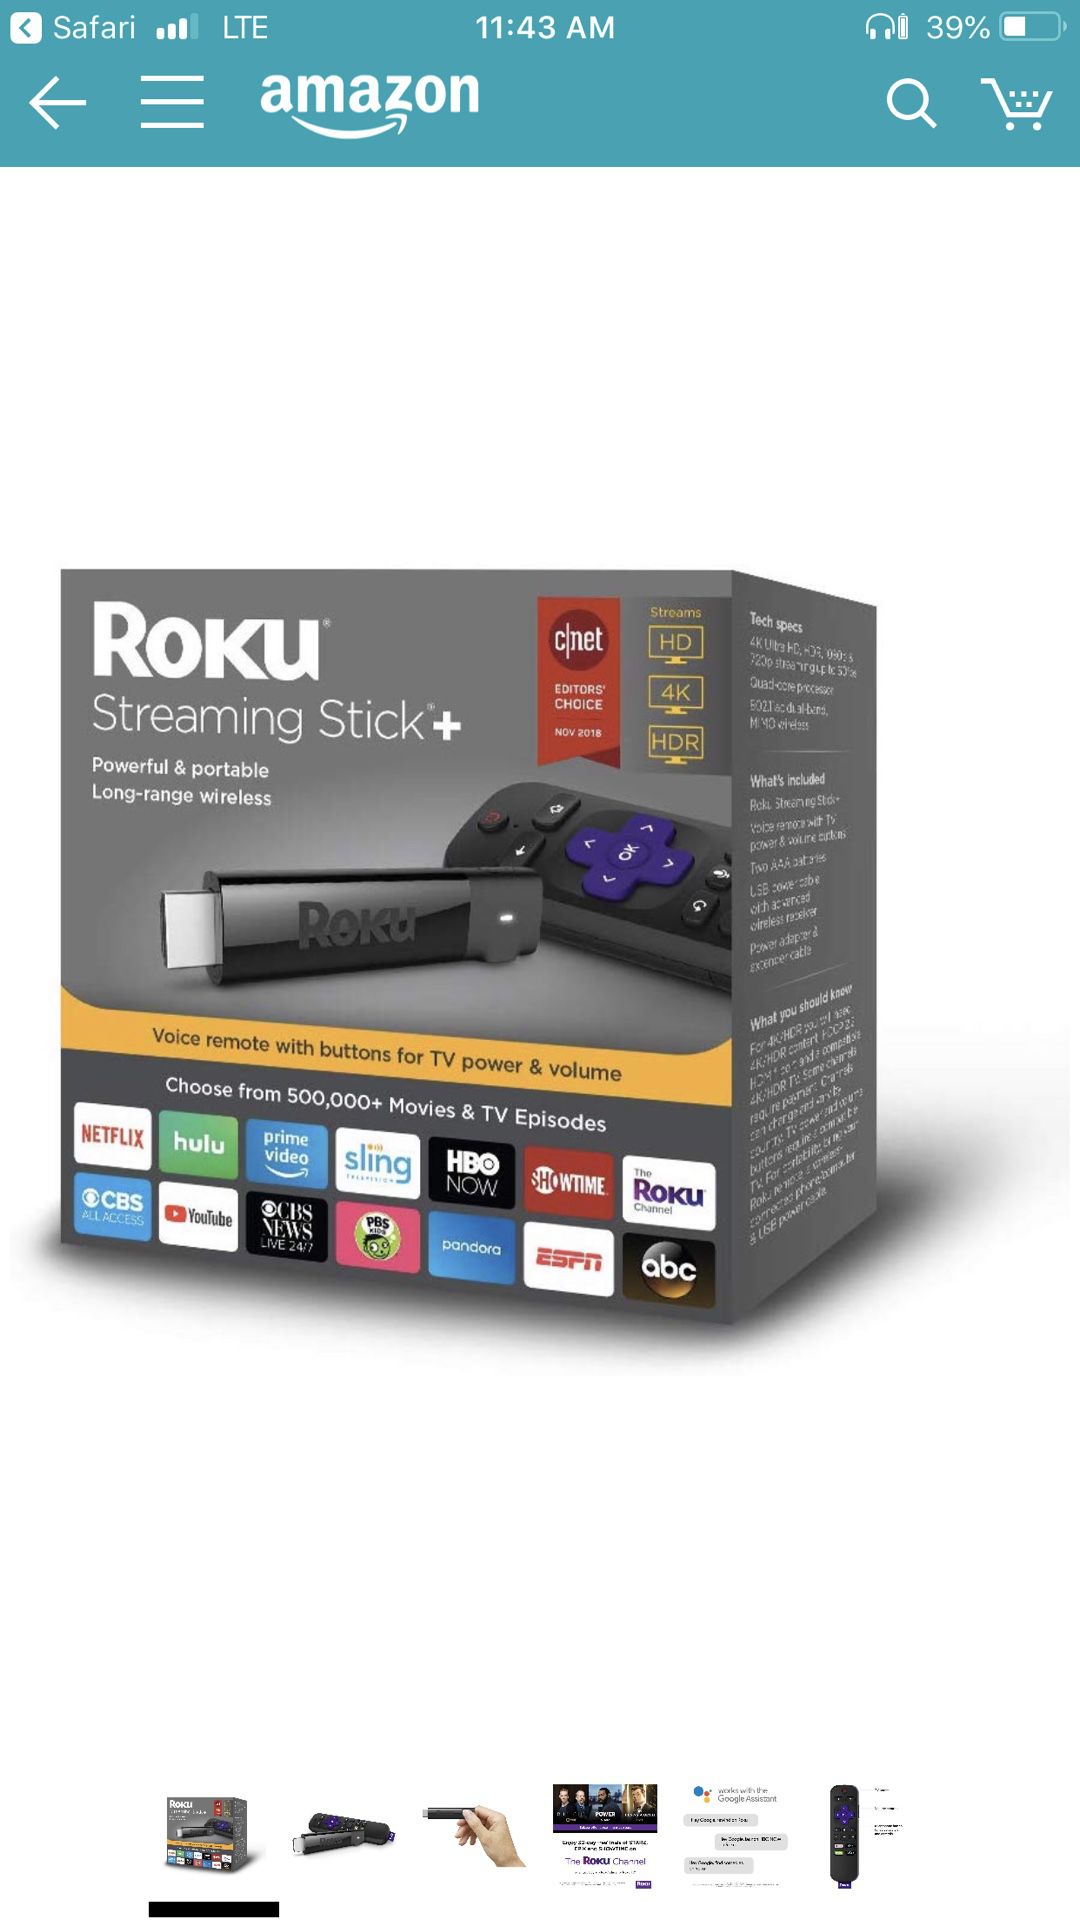 Roku Streaming Stick+ ($35 - TODAY ONLY)